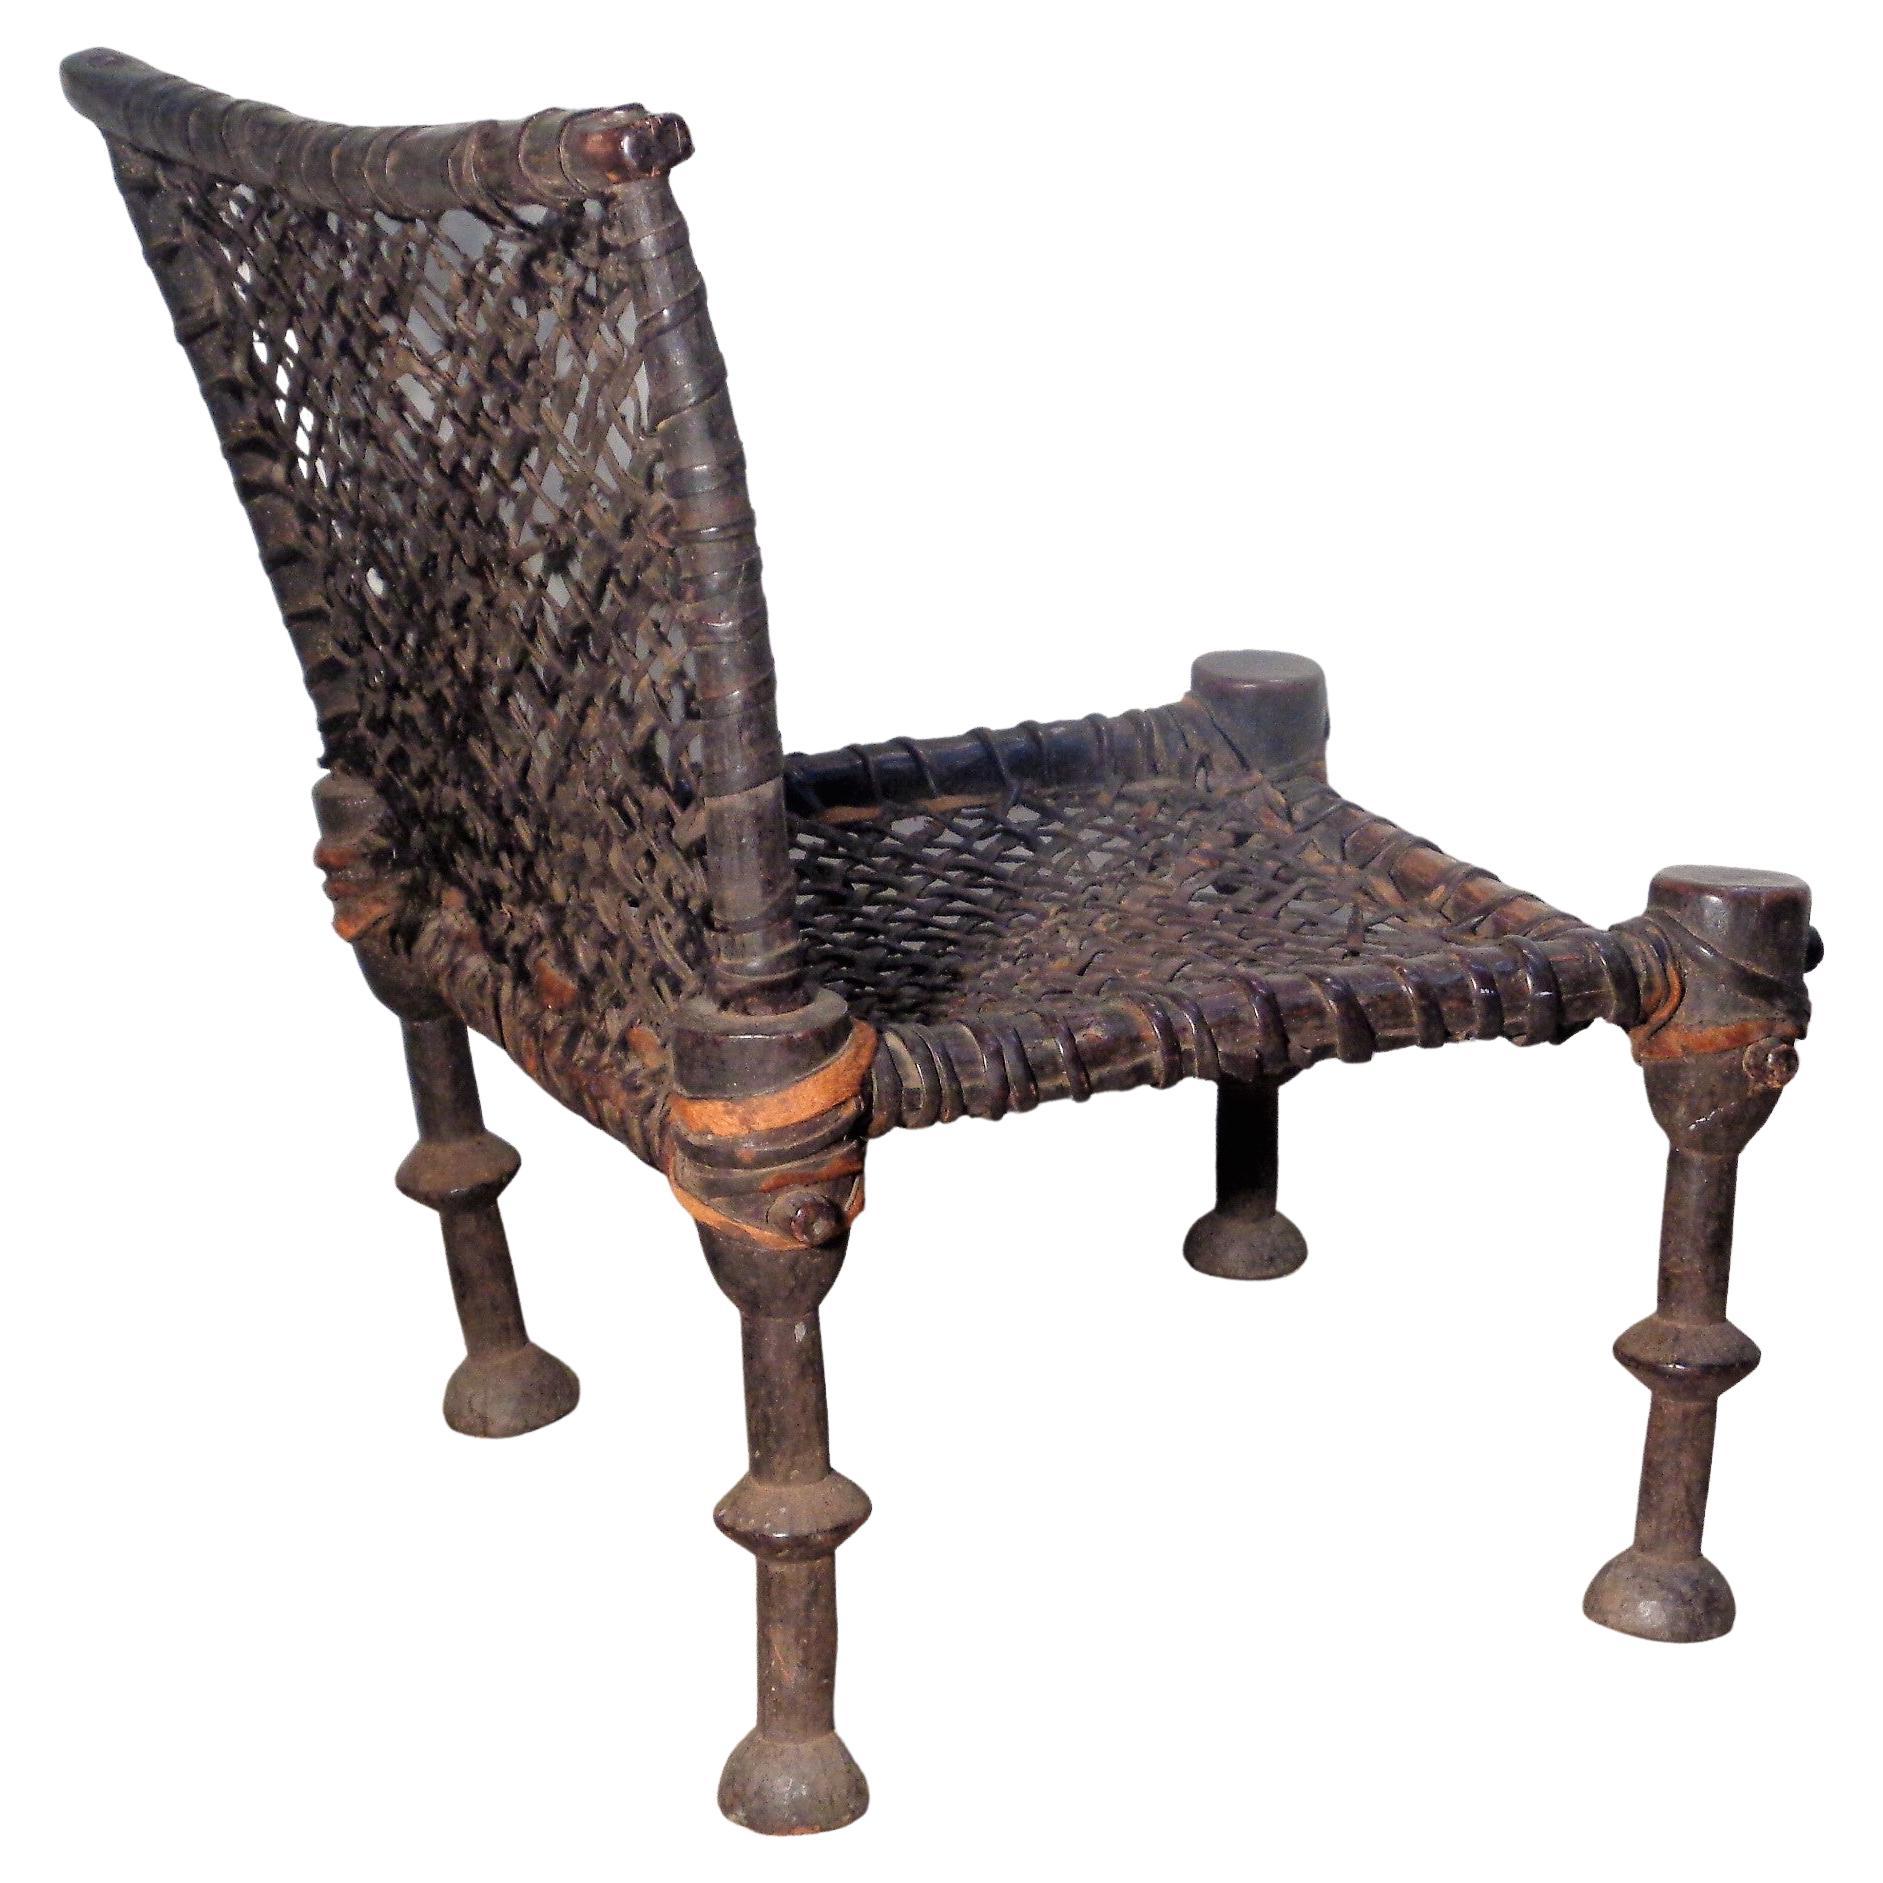 19th Century African Wood and Leather Chair In Good Condition For Sale In Rochester, NY